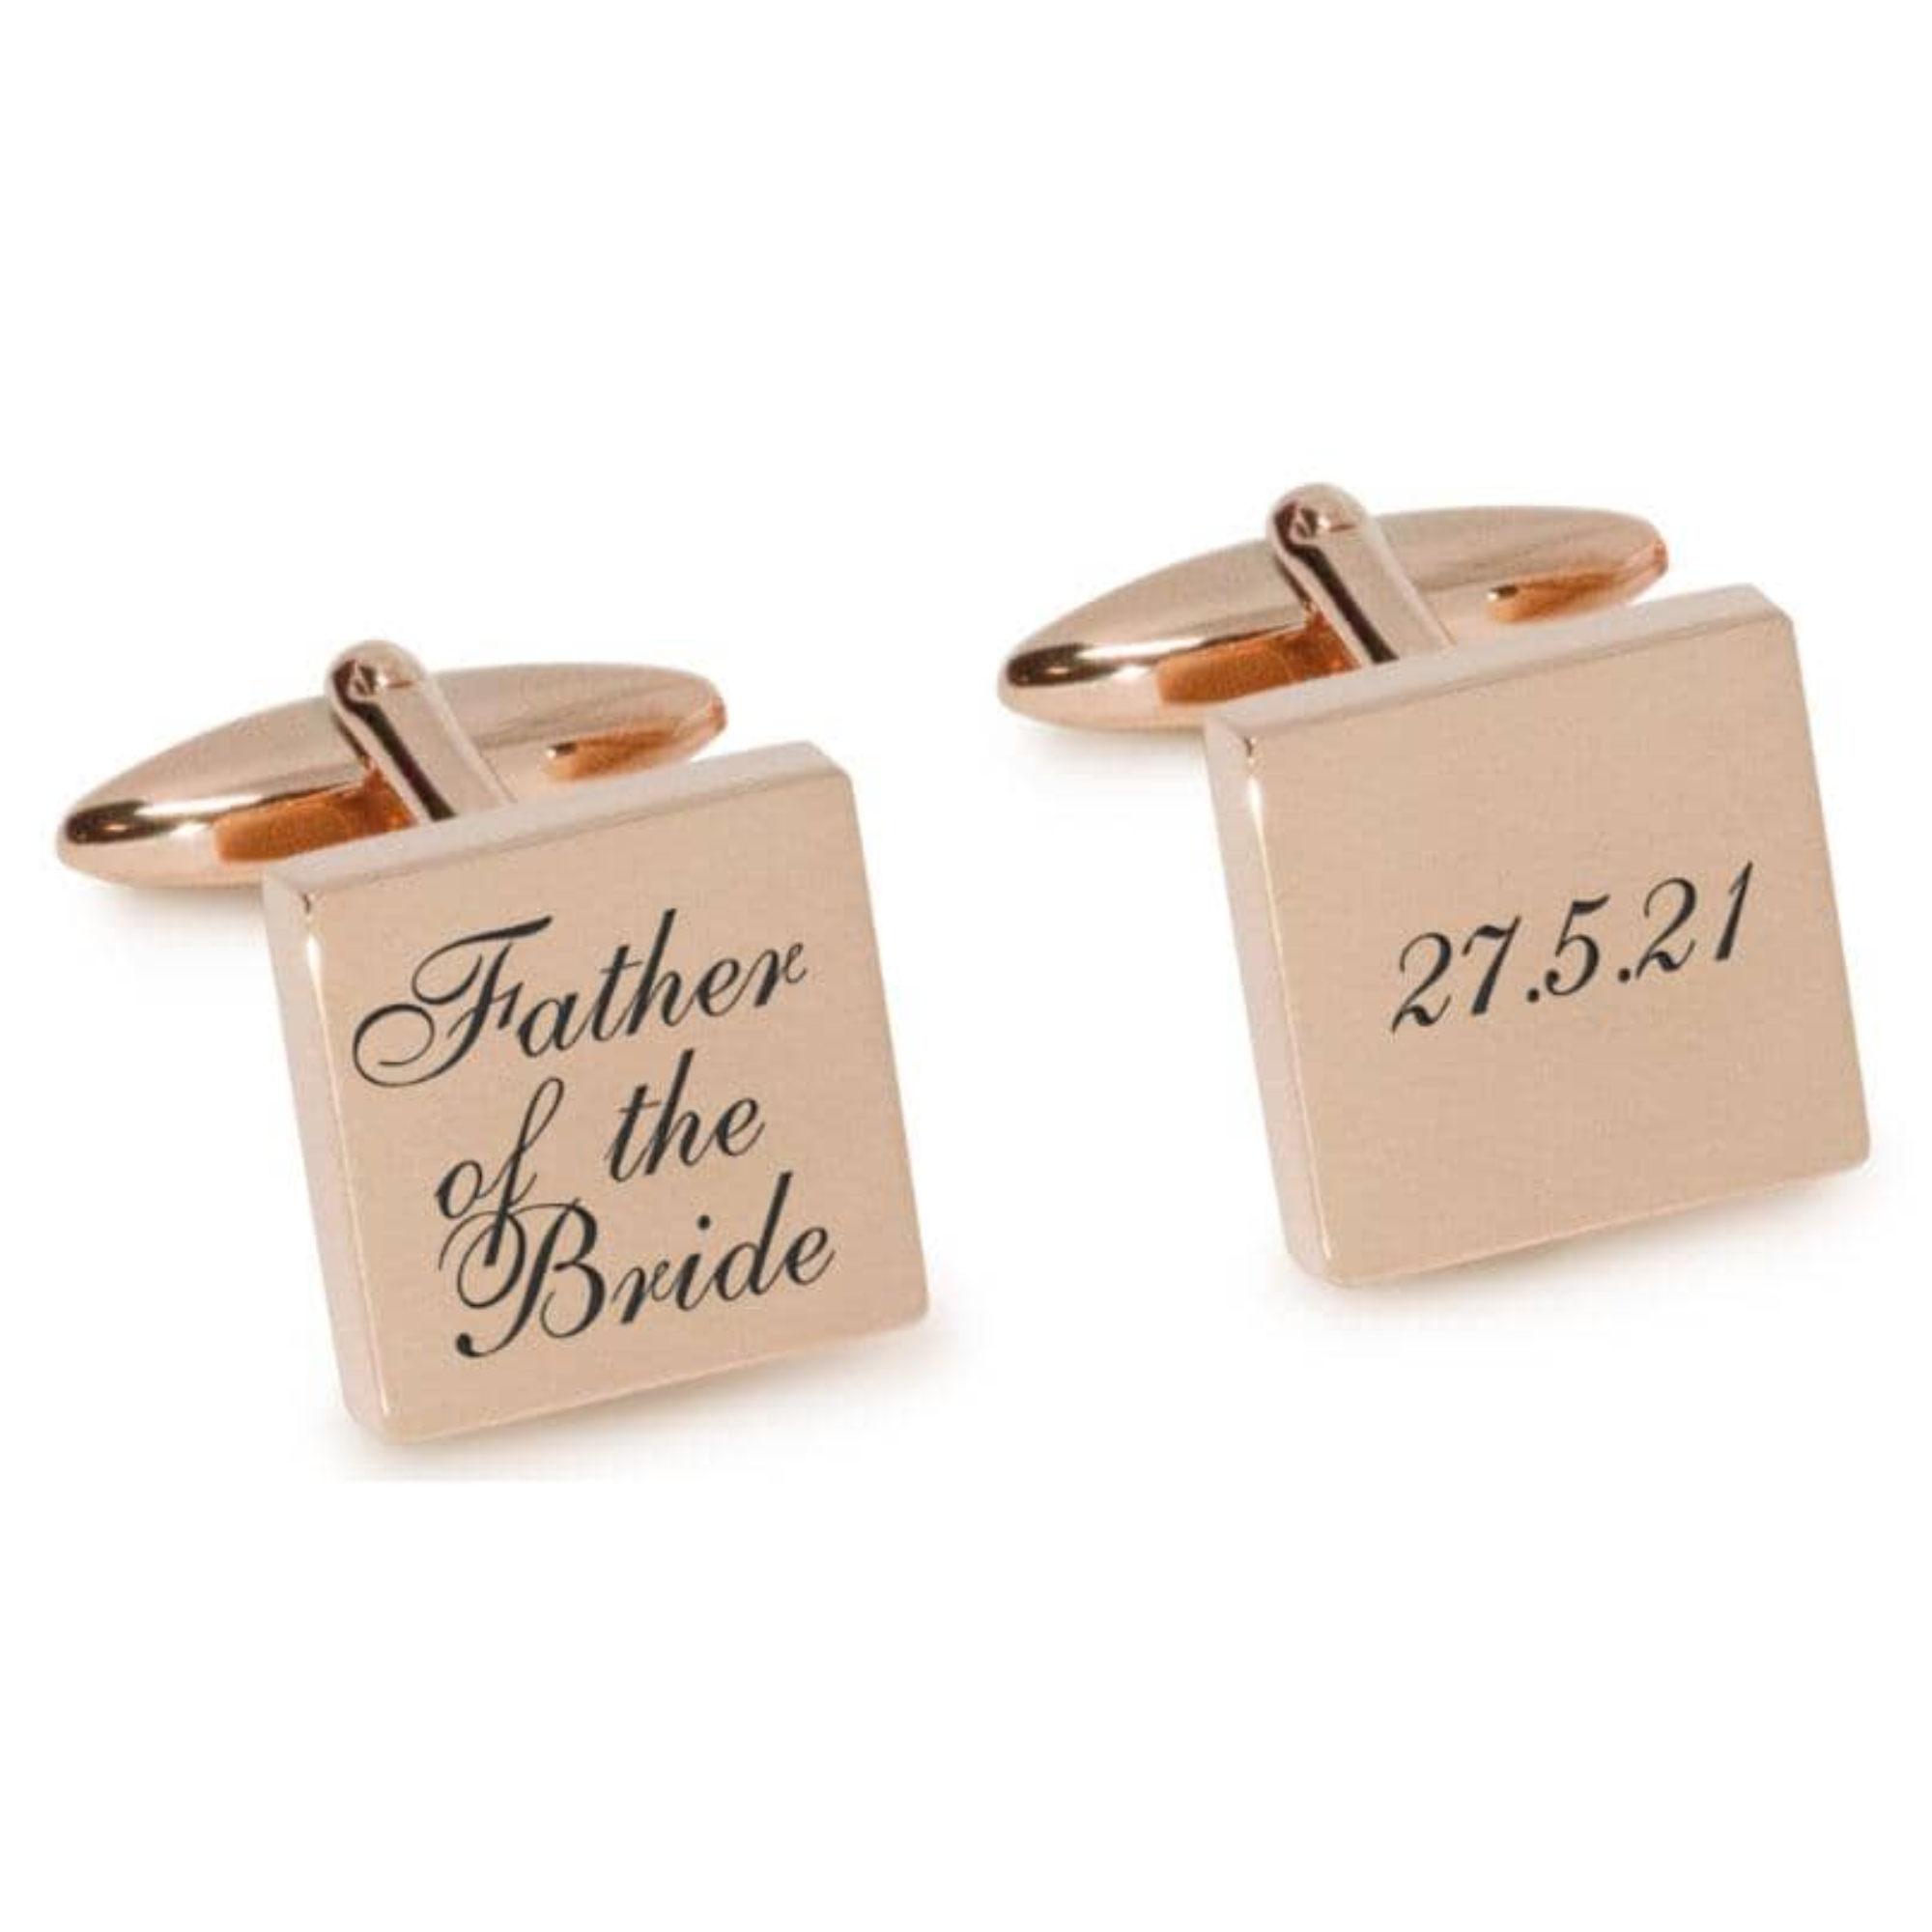 Father of the Bride Wedding Date Engraved Cufflinks in Rose Gold